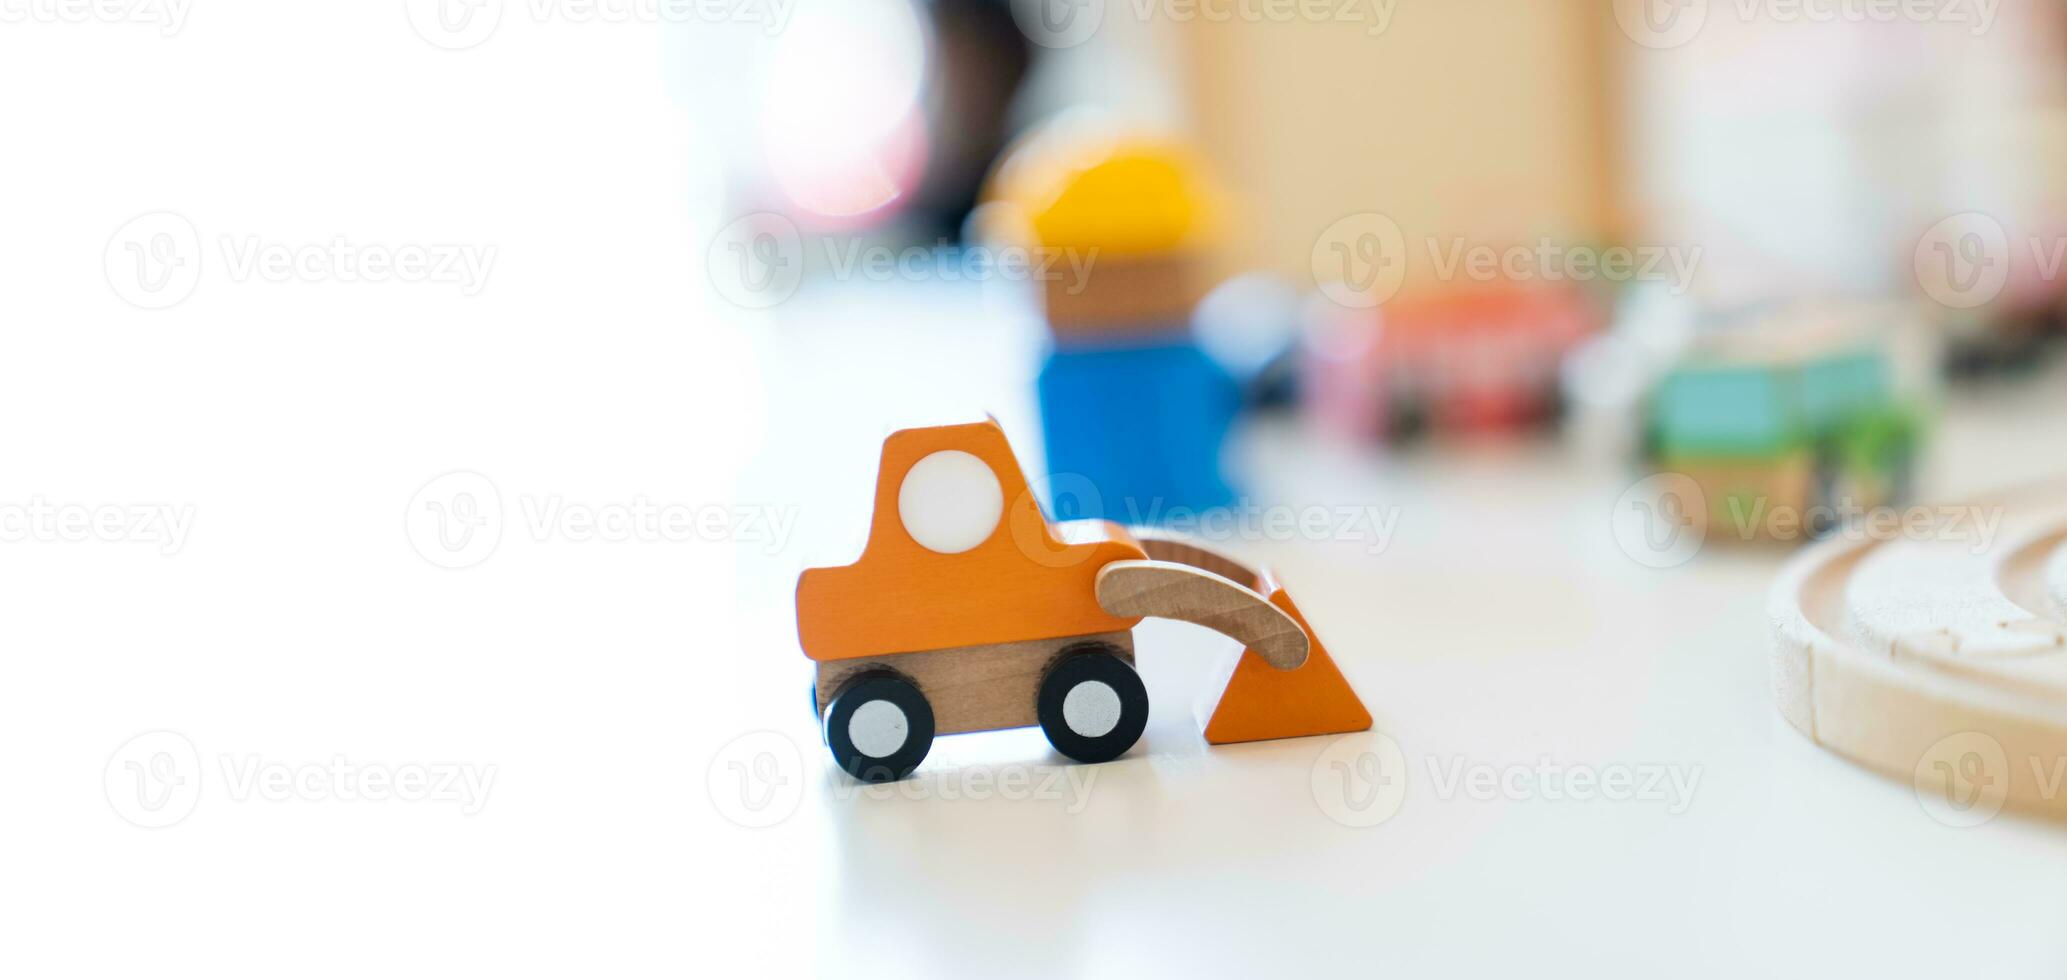 An orange wooden toy excavator is placed on the table in front of other blurry wooden toys. photo